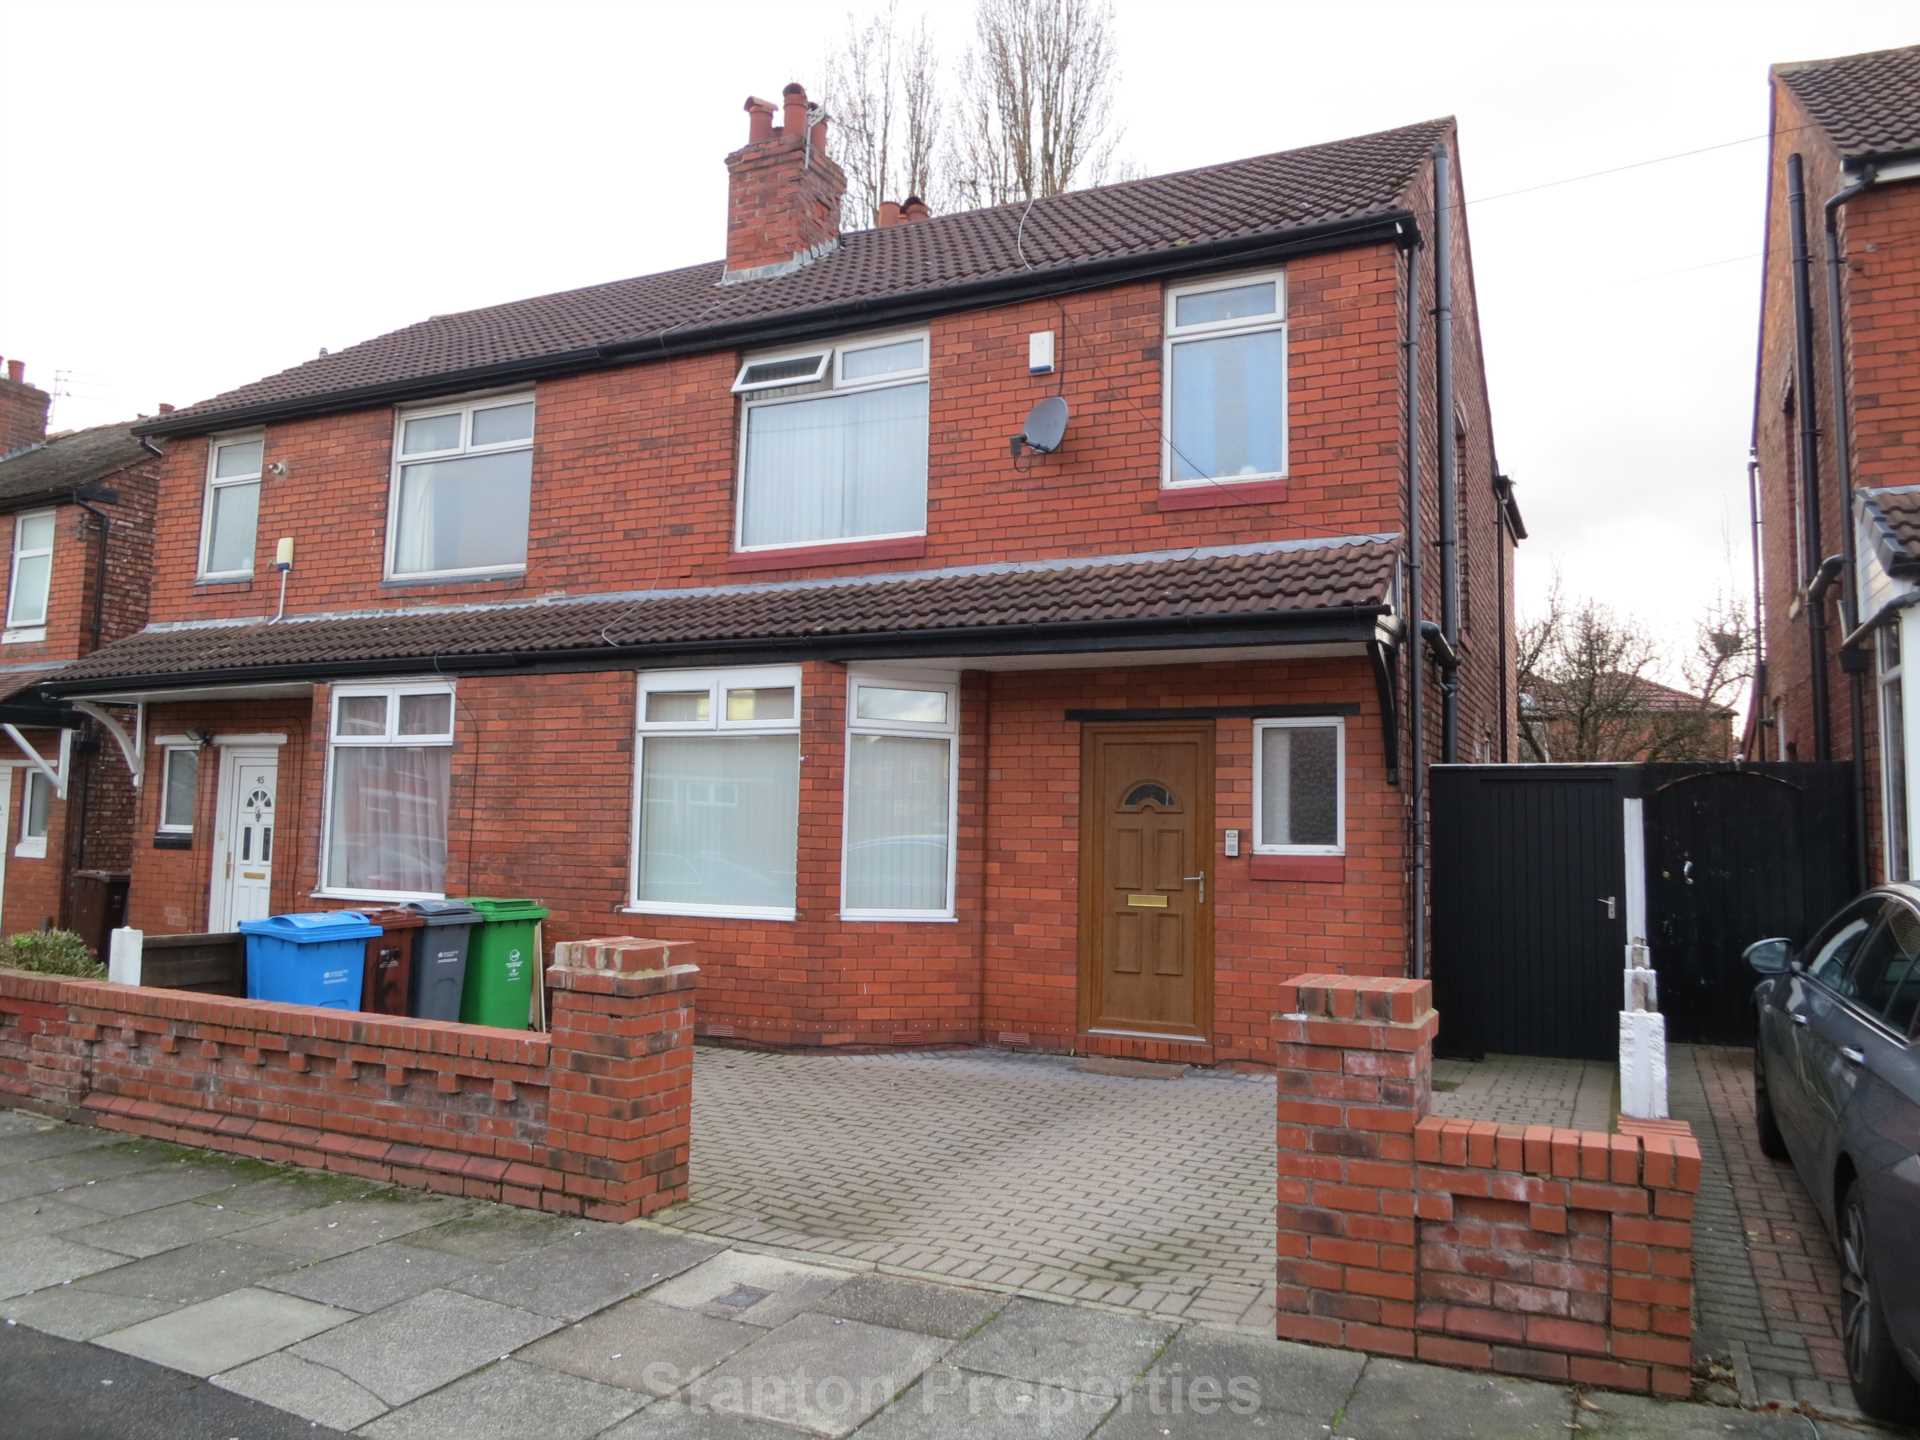 See Video Tour, £135 pppw, Brocklebank Road, Fallowfield, Image 16